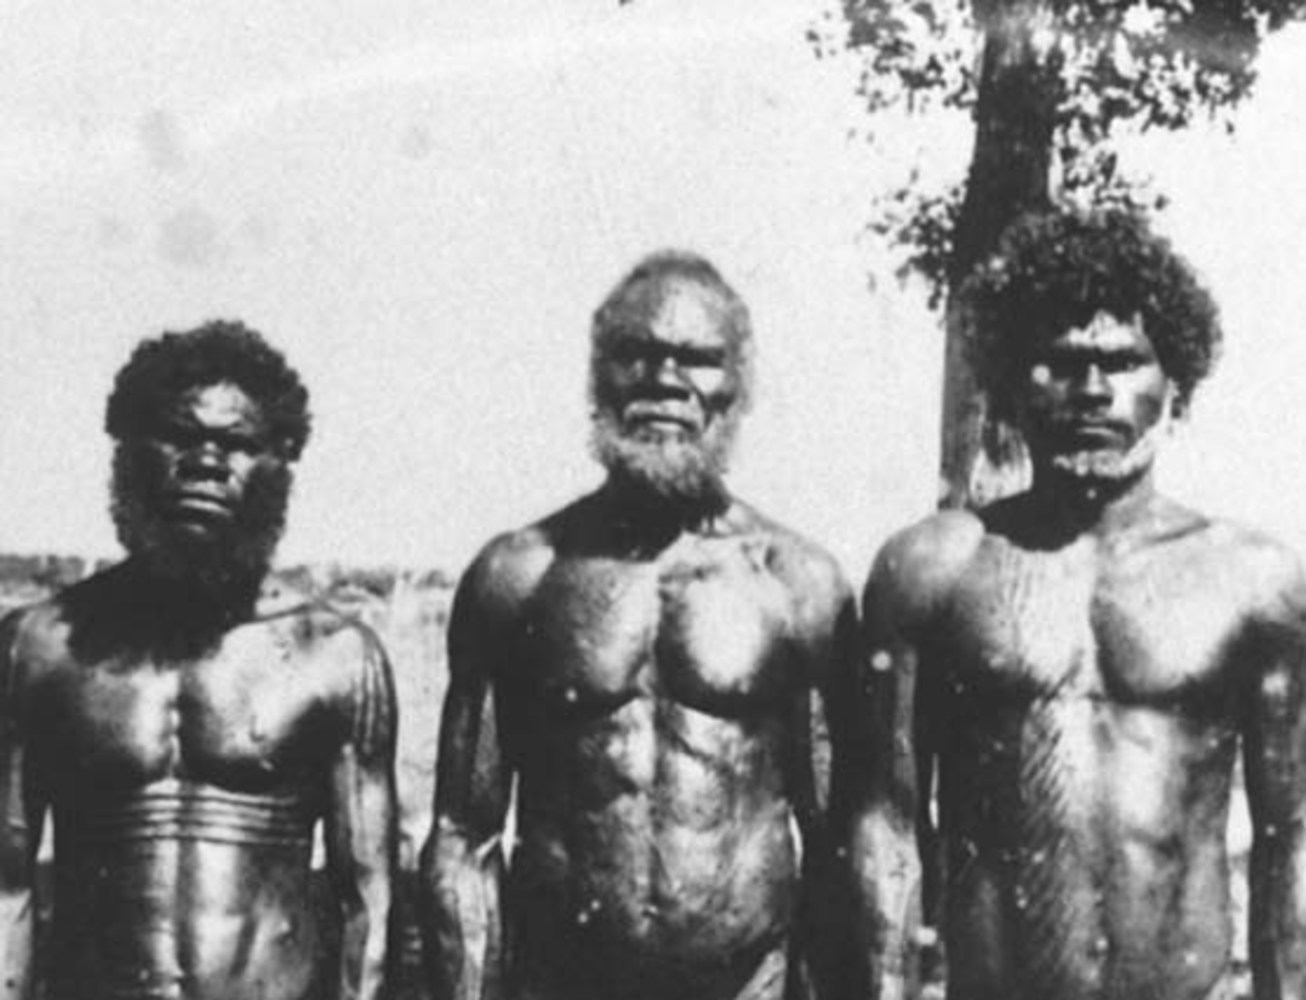 Personal photographs of the Hon. C L A Abbott during his term as Administrator of the Northern Territory - Aborigine Chief of Bathurst Island. Date: 1939